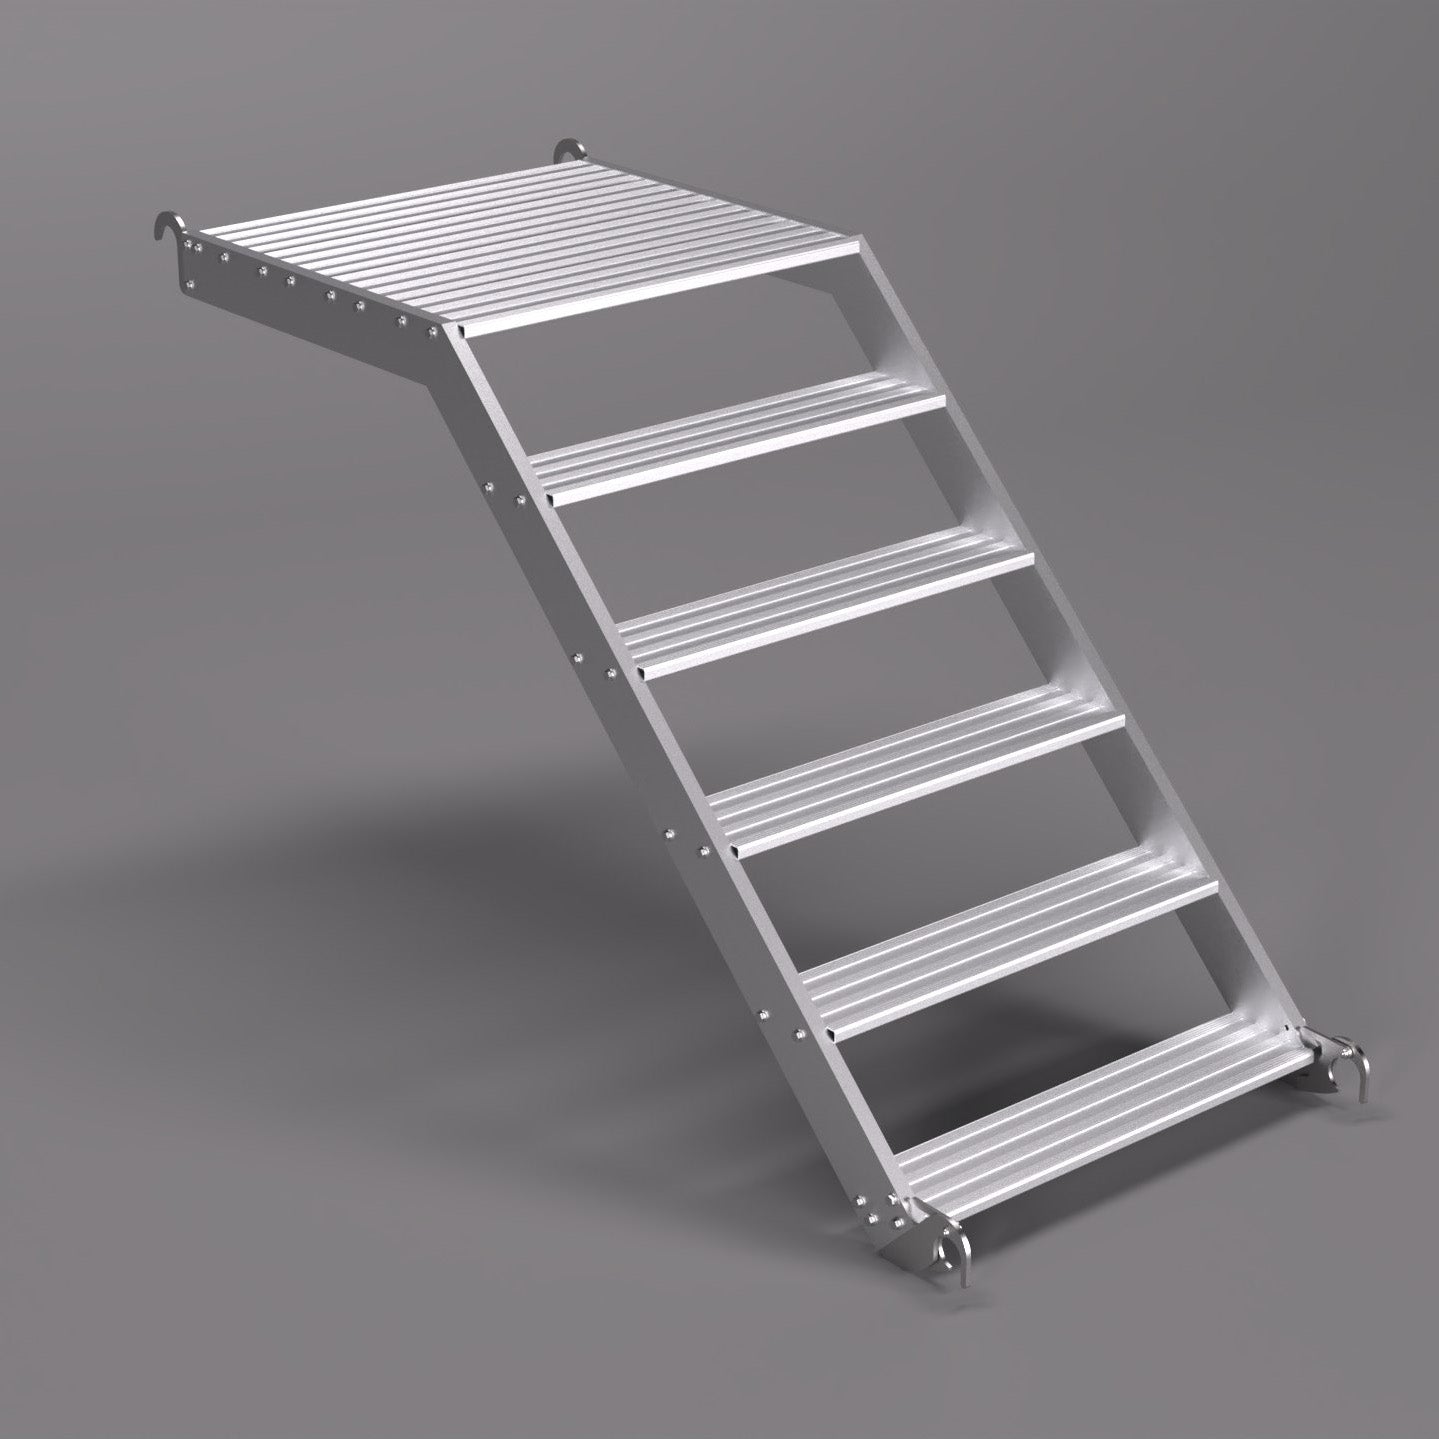 An image of the 1m ALTO Cup System stair unit.